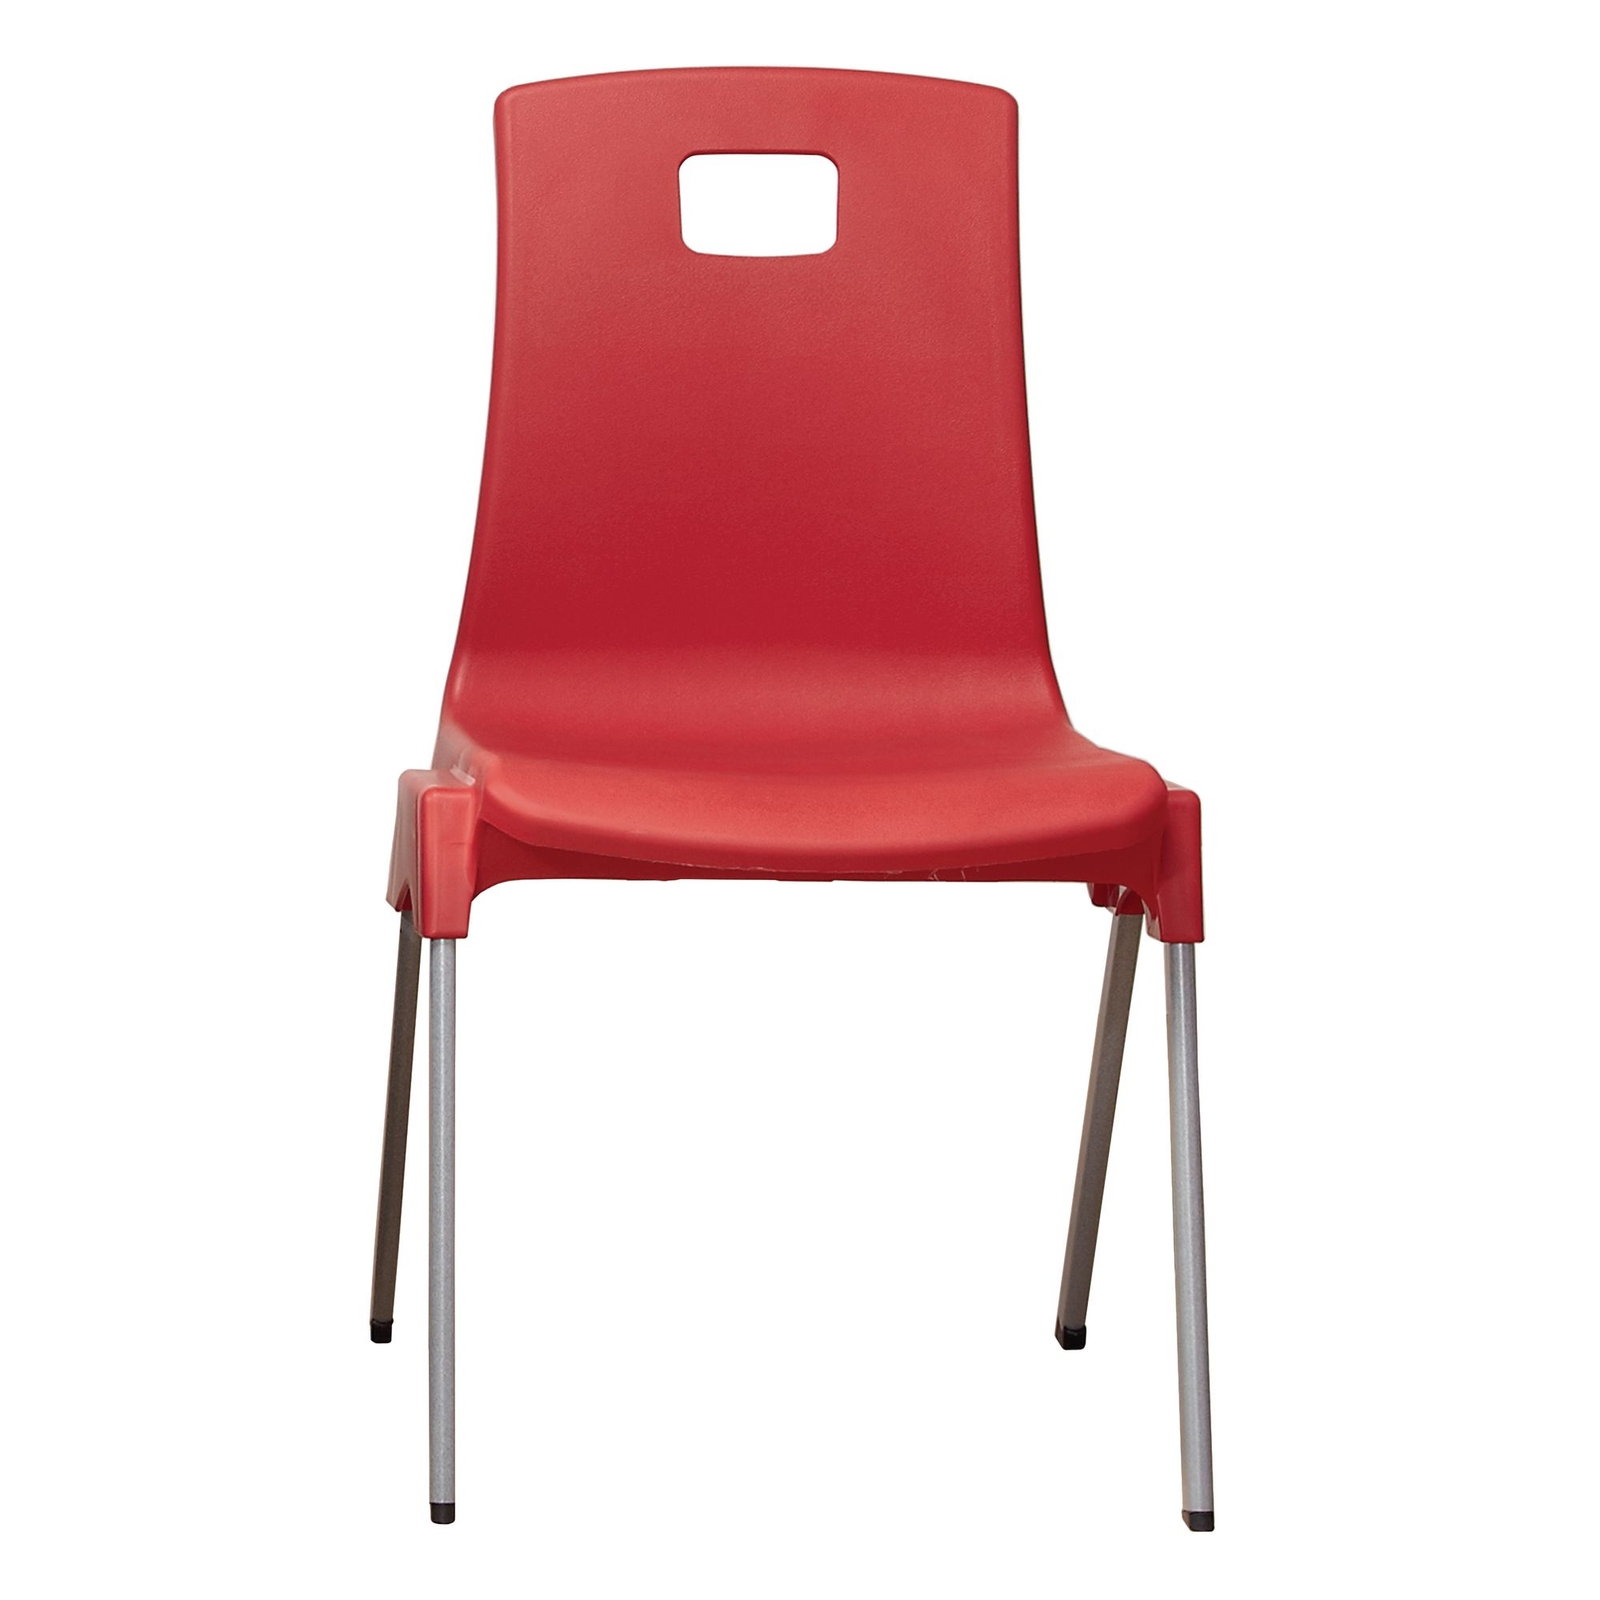 ST Chair - Size B - 310mm - Red